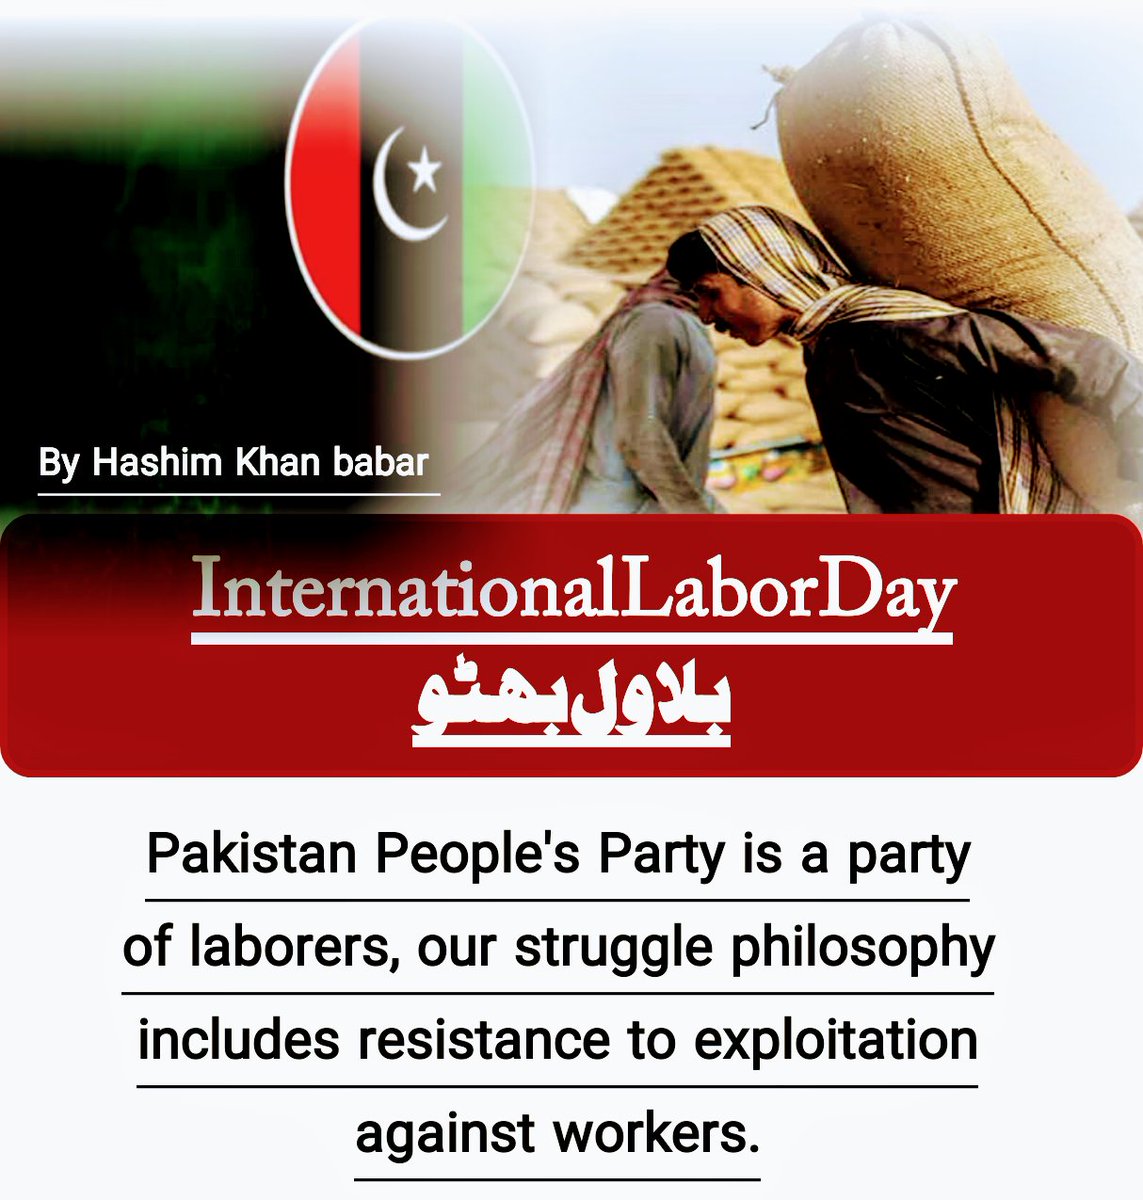 Our party is a struggle for the workers. We have always struggled against the economic exploitation of the workers and made historic decisions.
@BakhtawarBZ @MediaCellPPP 
#worldlaborday